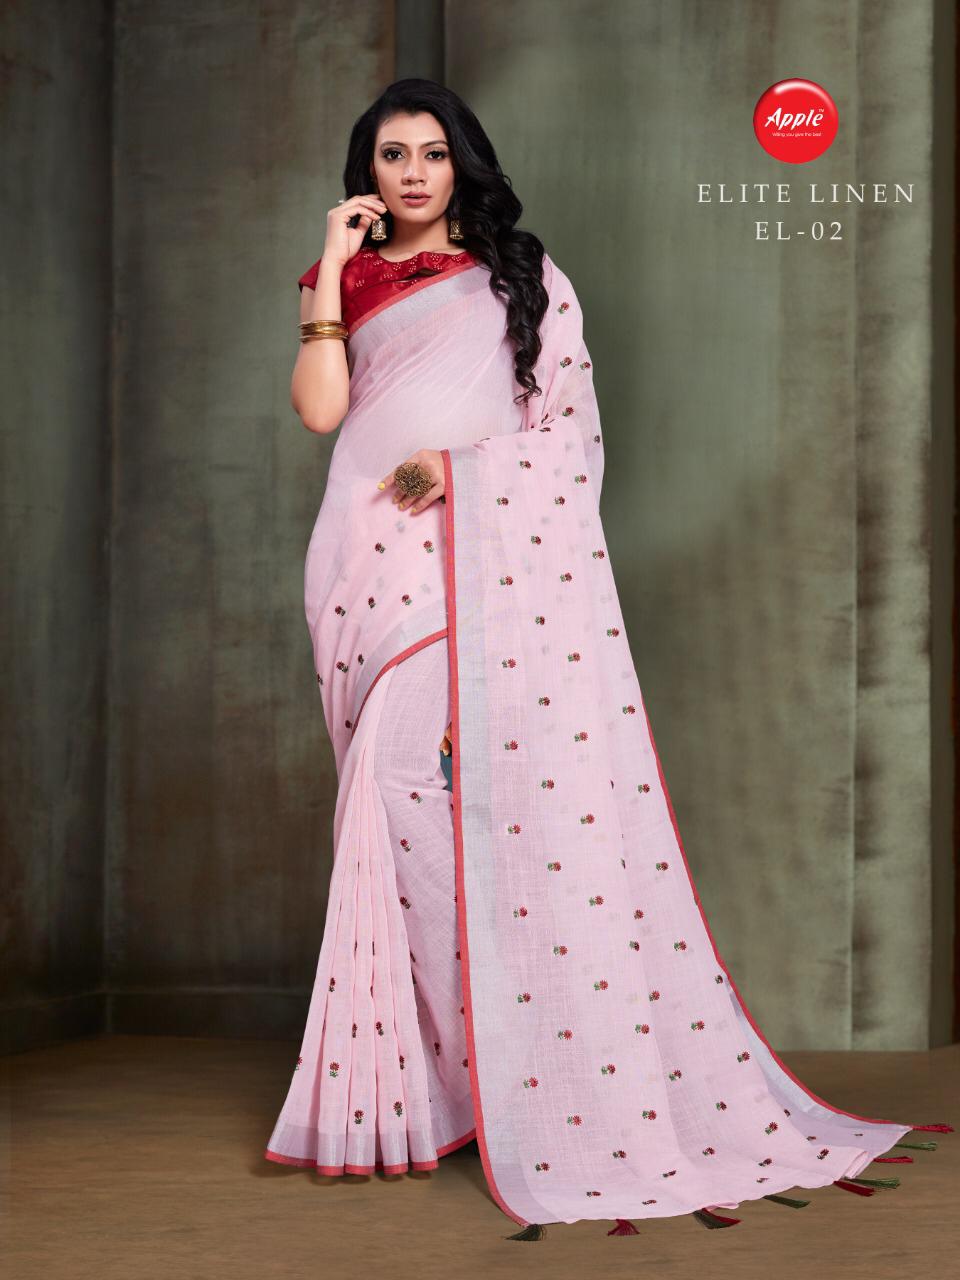 Apple elite linen astonishing style linen silk embroidery sarees with free size blouses